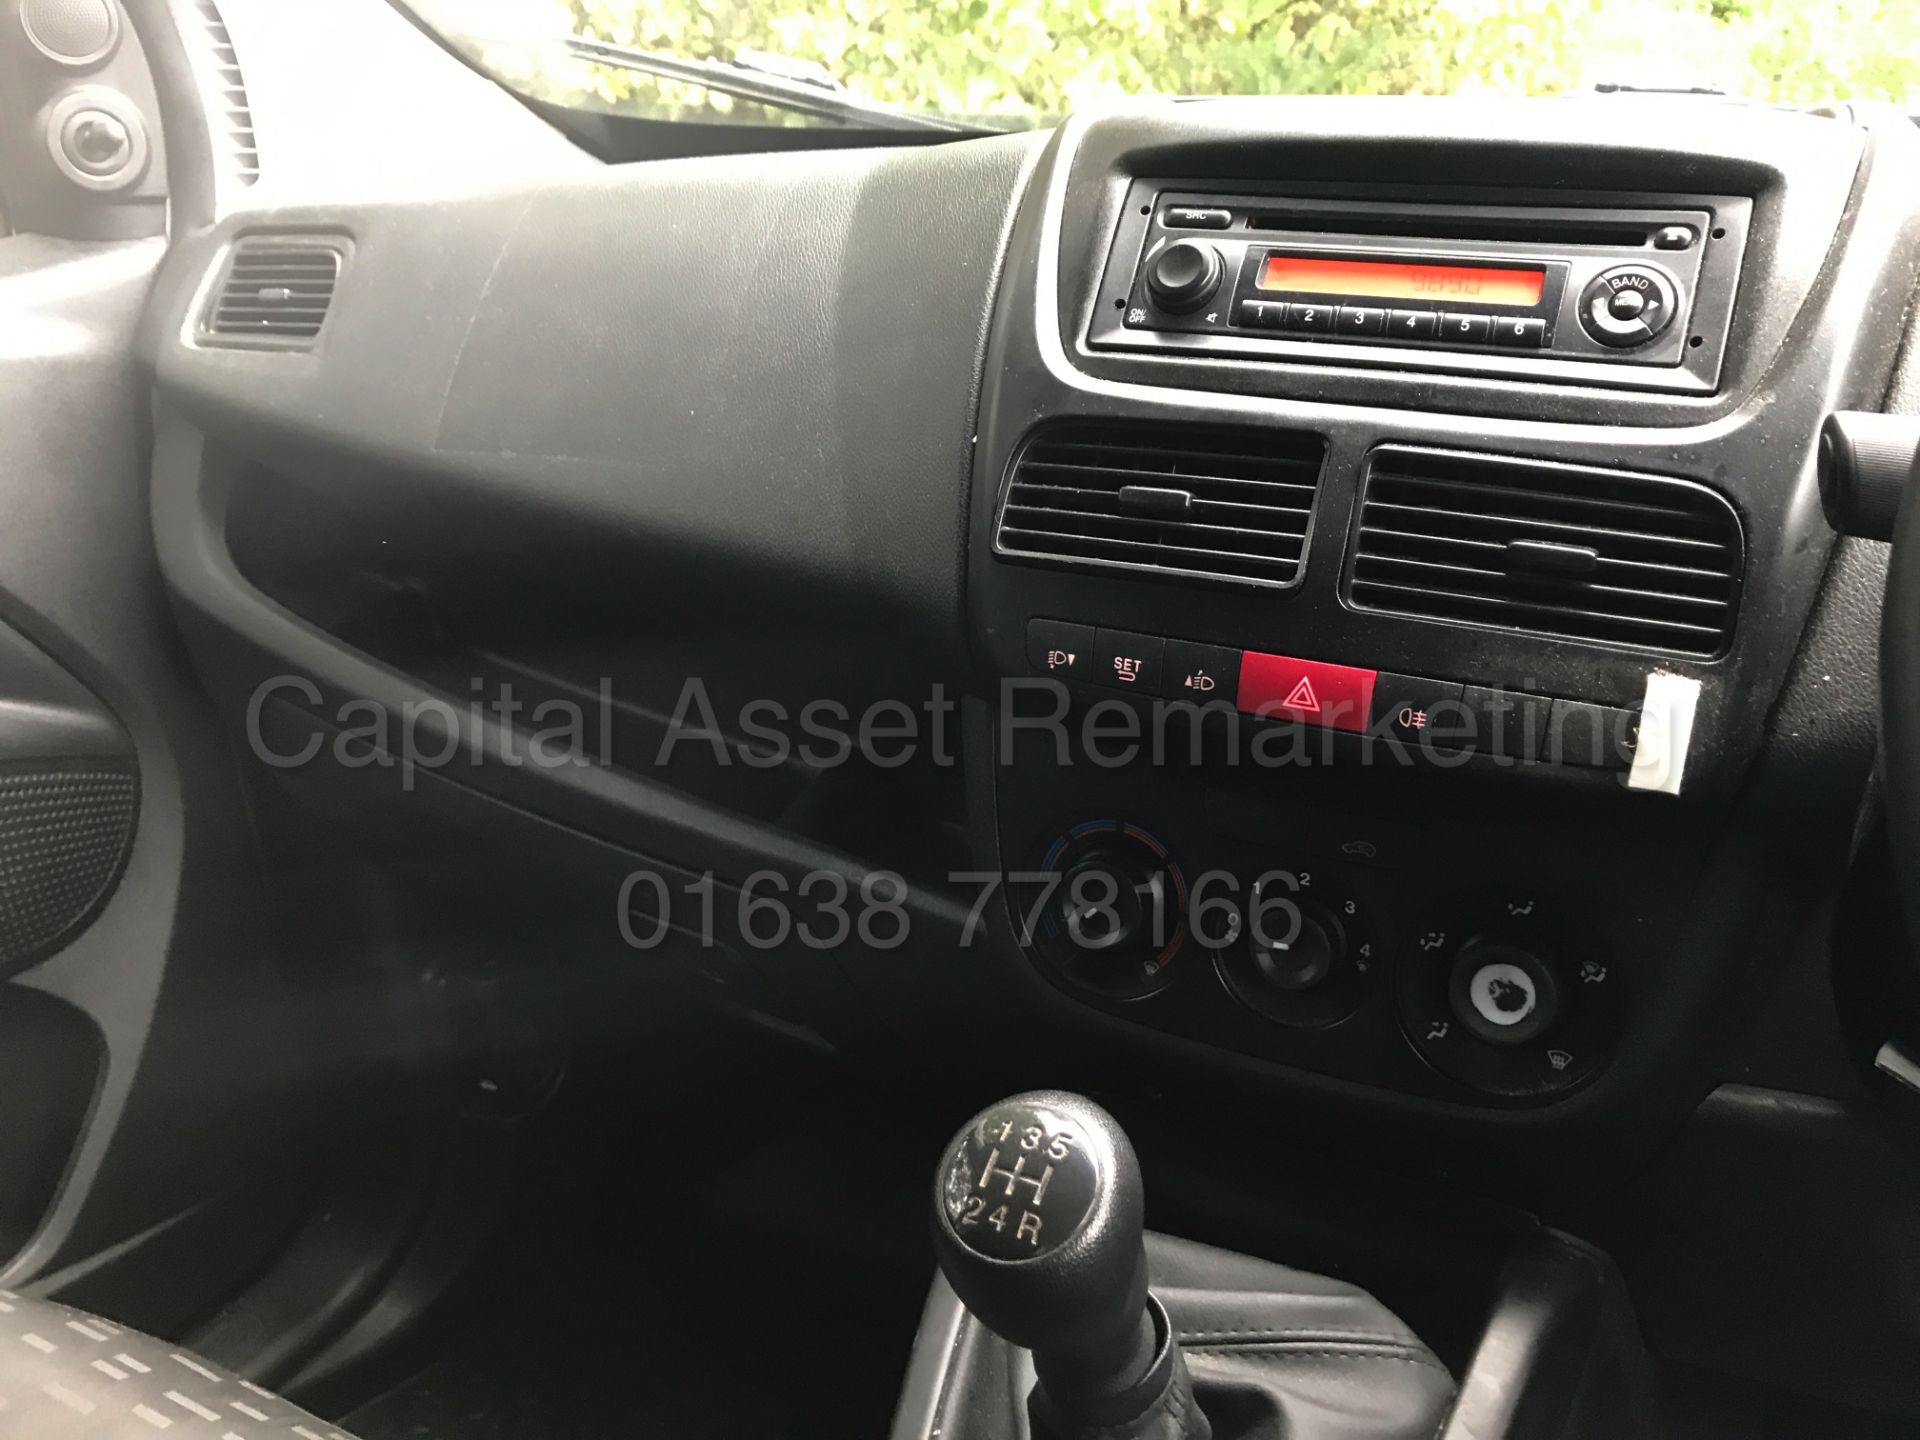 VAUXHALL COMBO 2000 L1H1 (2015 MODEL) 'CDTI - 90 BHP' (1 FORMER COMPANY OWNER FROM NEW) *50 MPG+* - Image 20 of 25